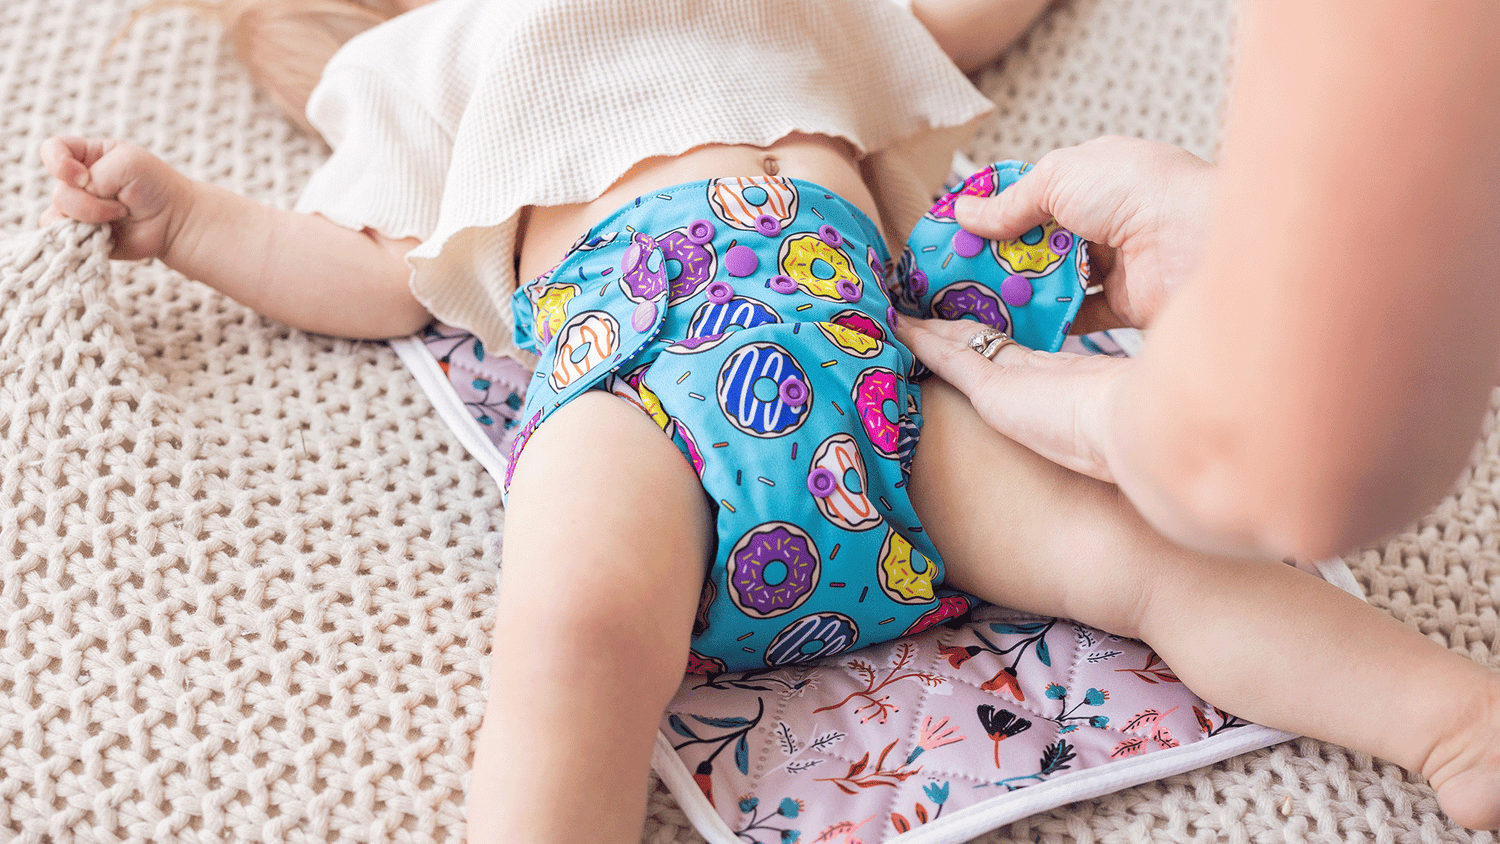 reusable pocket style cloth diaper with robot print awj athletic wicking jersey mesh patterned best pocket diaper